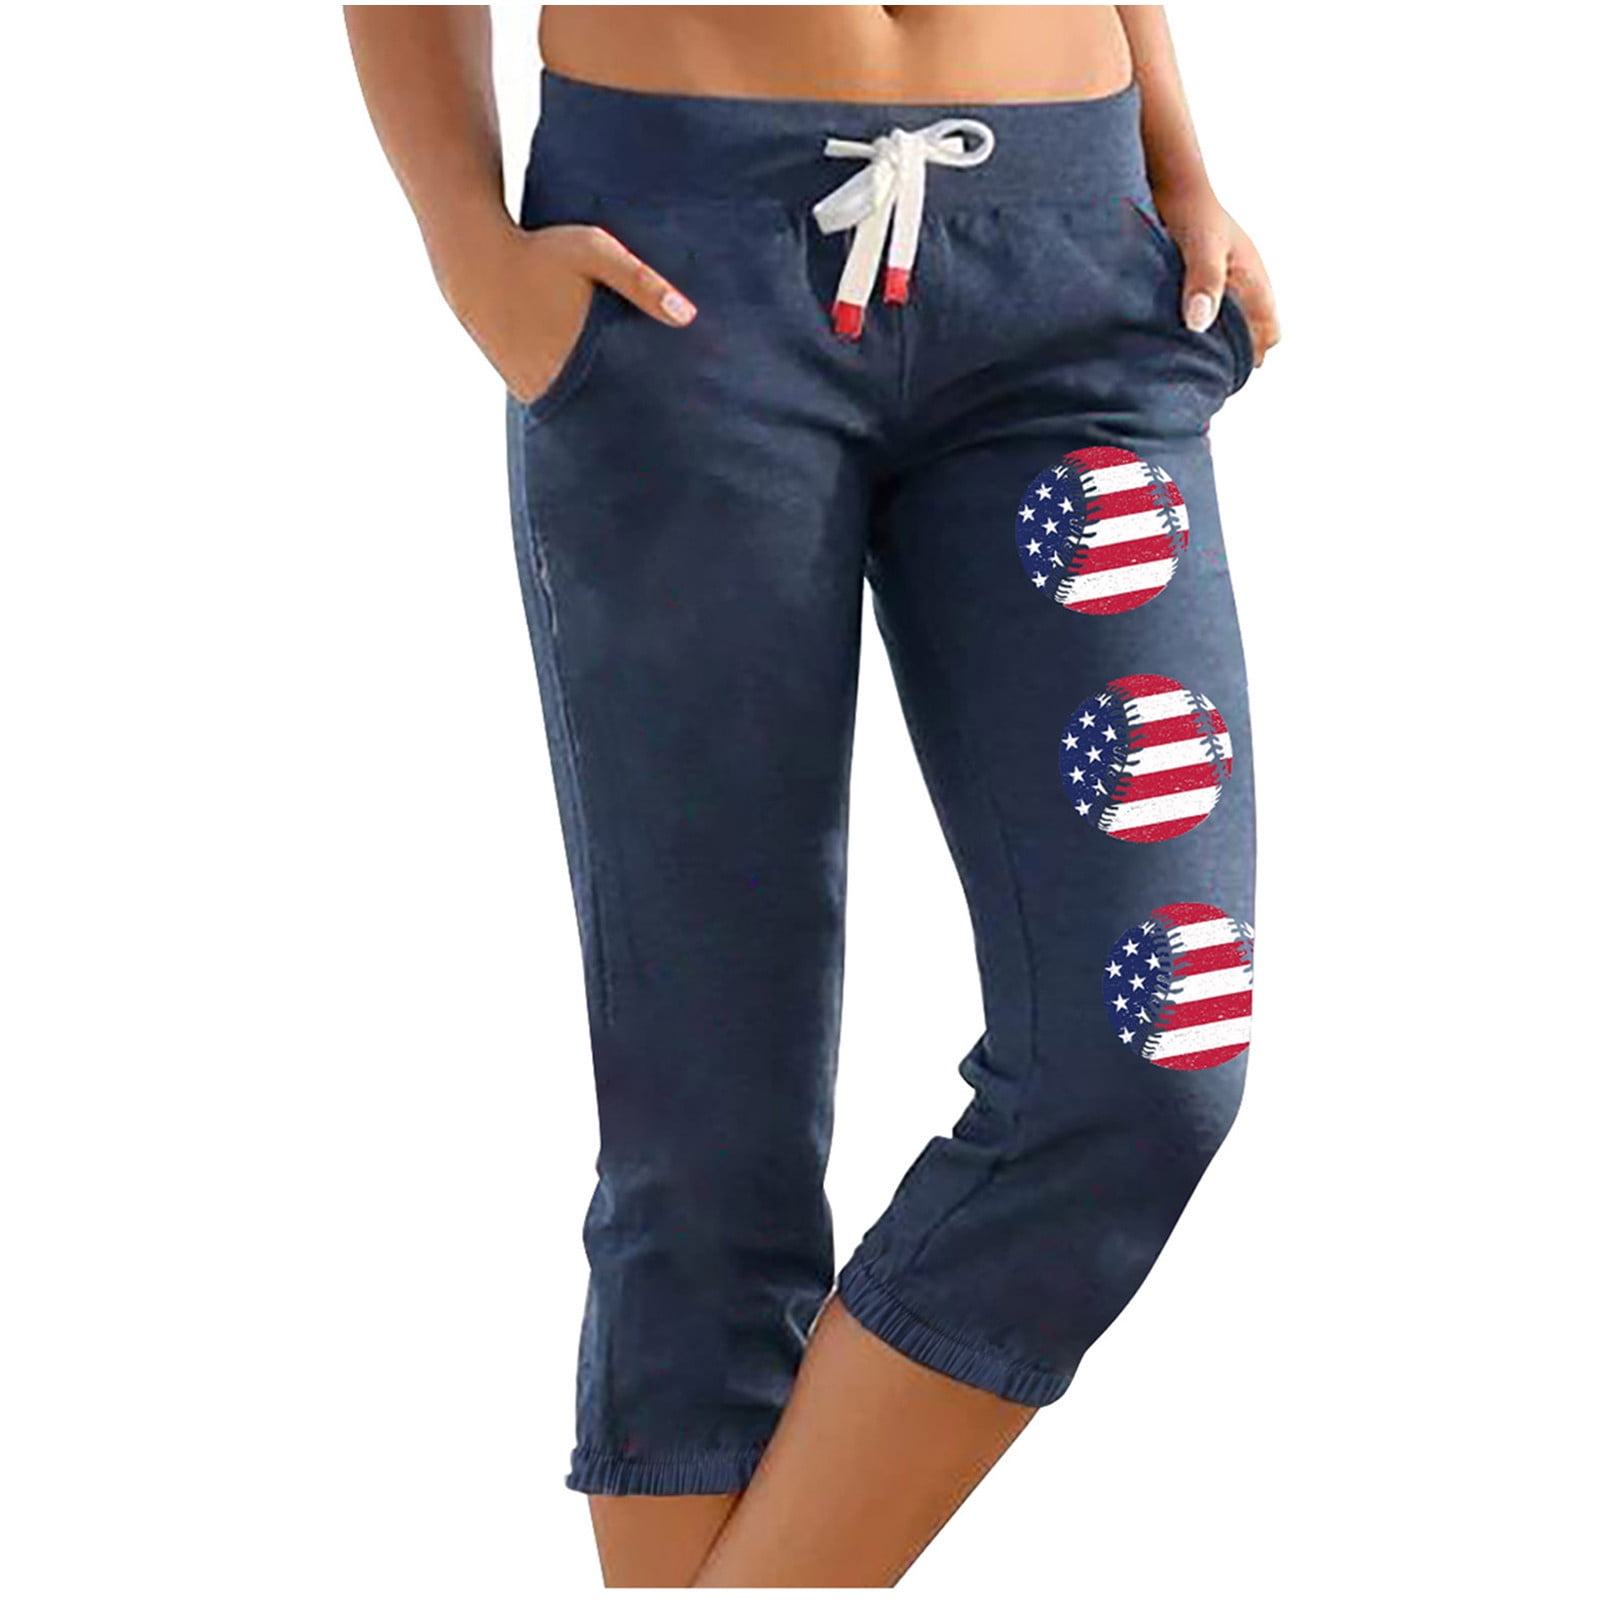 Quality Fashion Women Pants Sport Casual Joggers Sweatpants Woman Clothes  Fitness Capris Ladies Trousers Bottom Pantalones Mujer